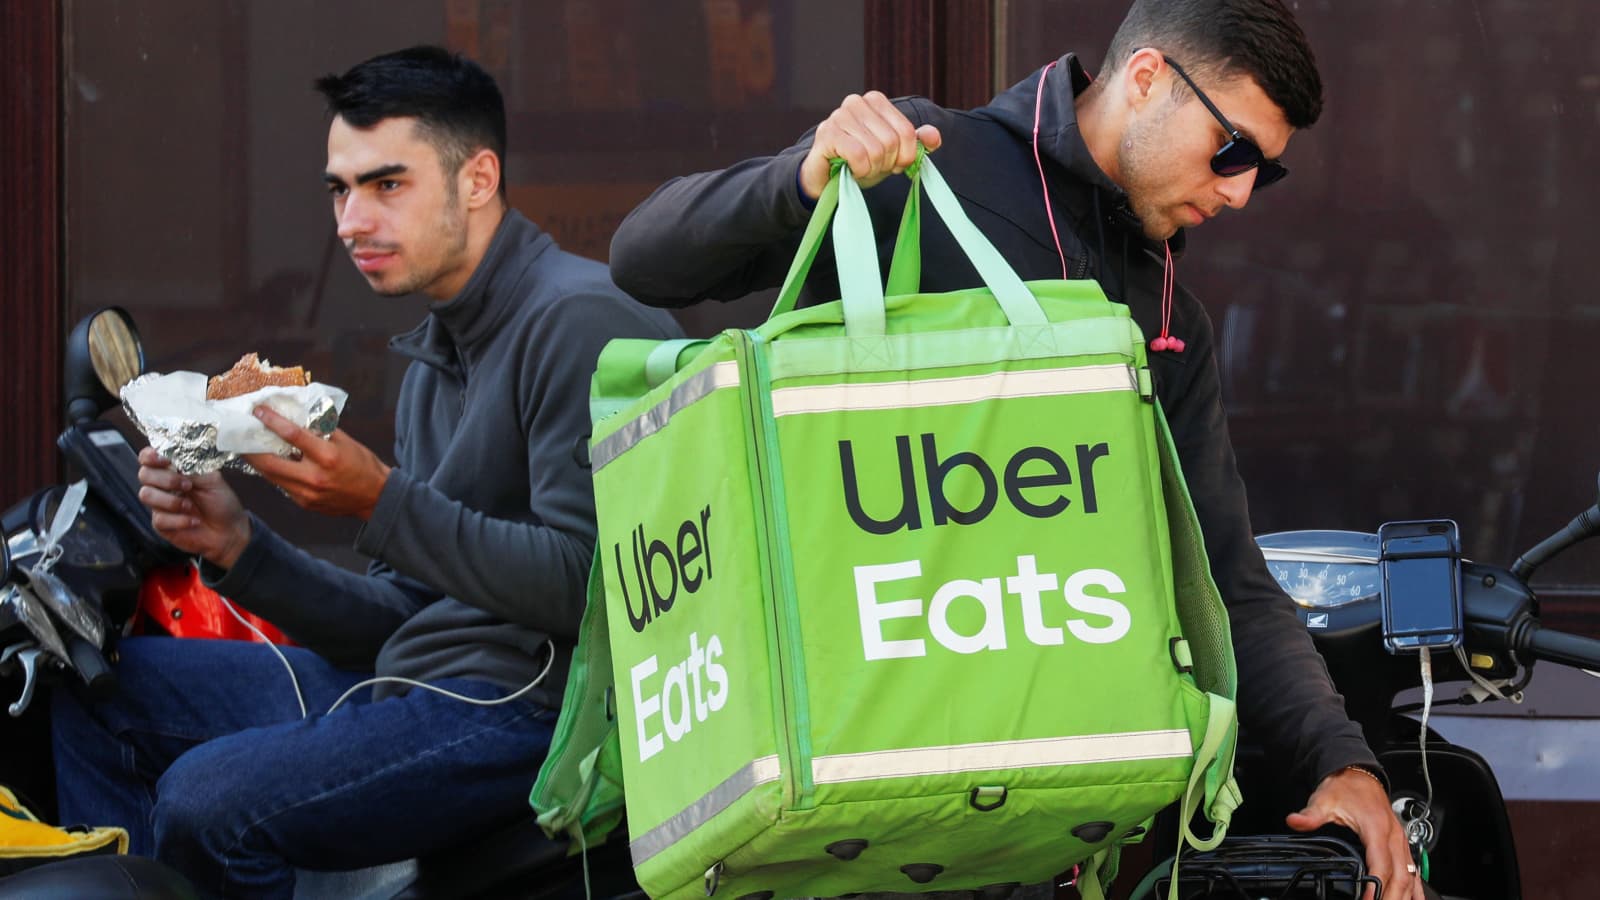 Instacart Partners With Uber Eats to Expand Restaurant Delivery Service